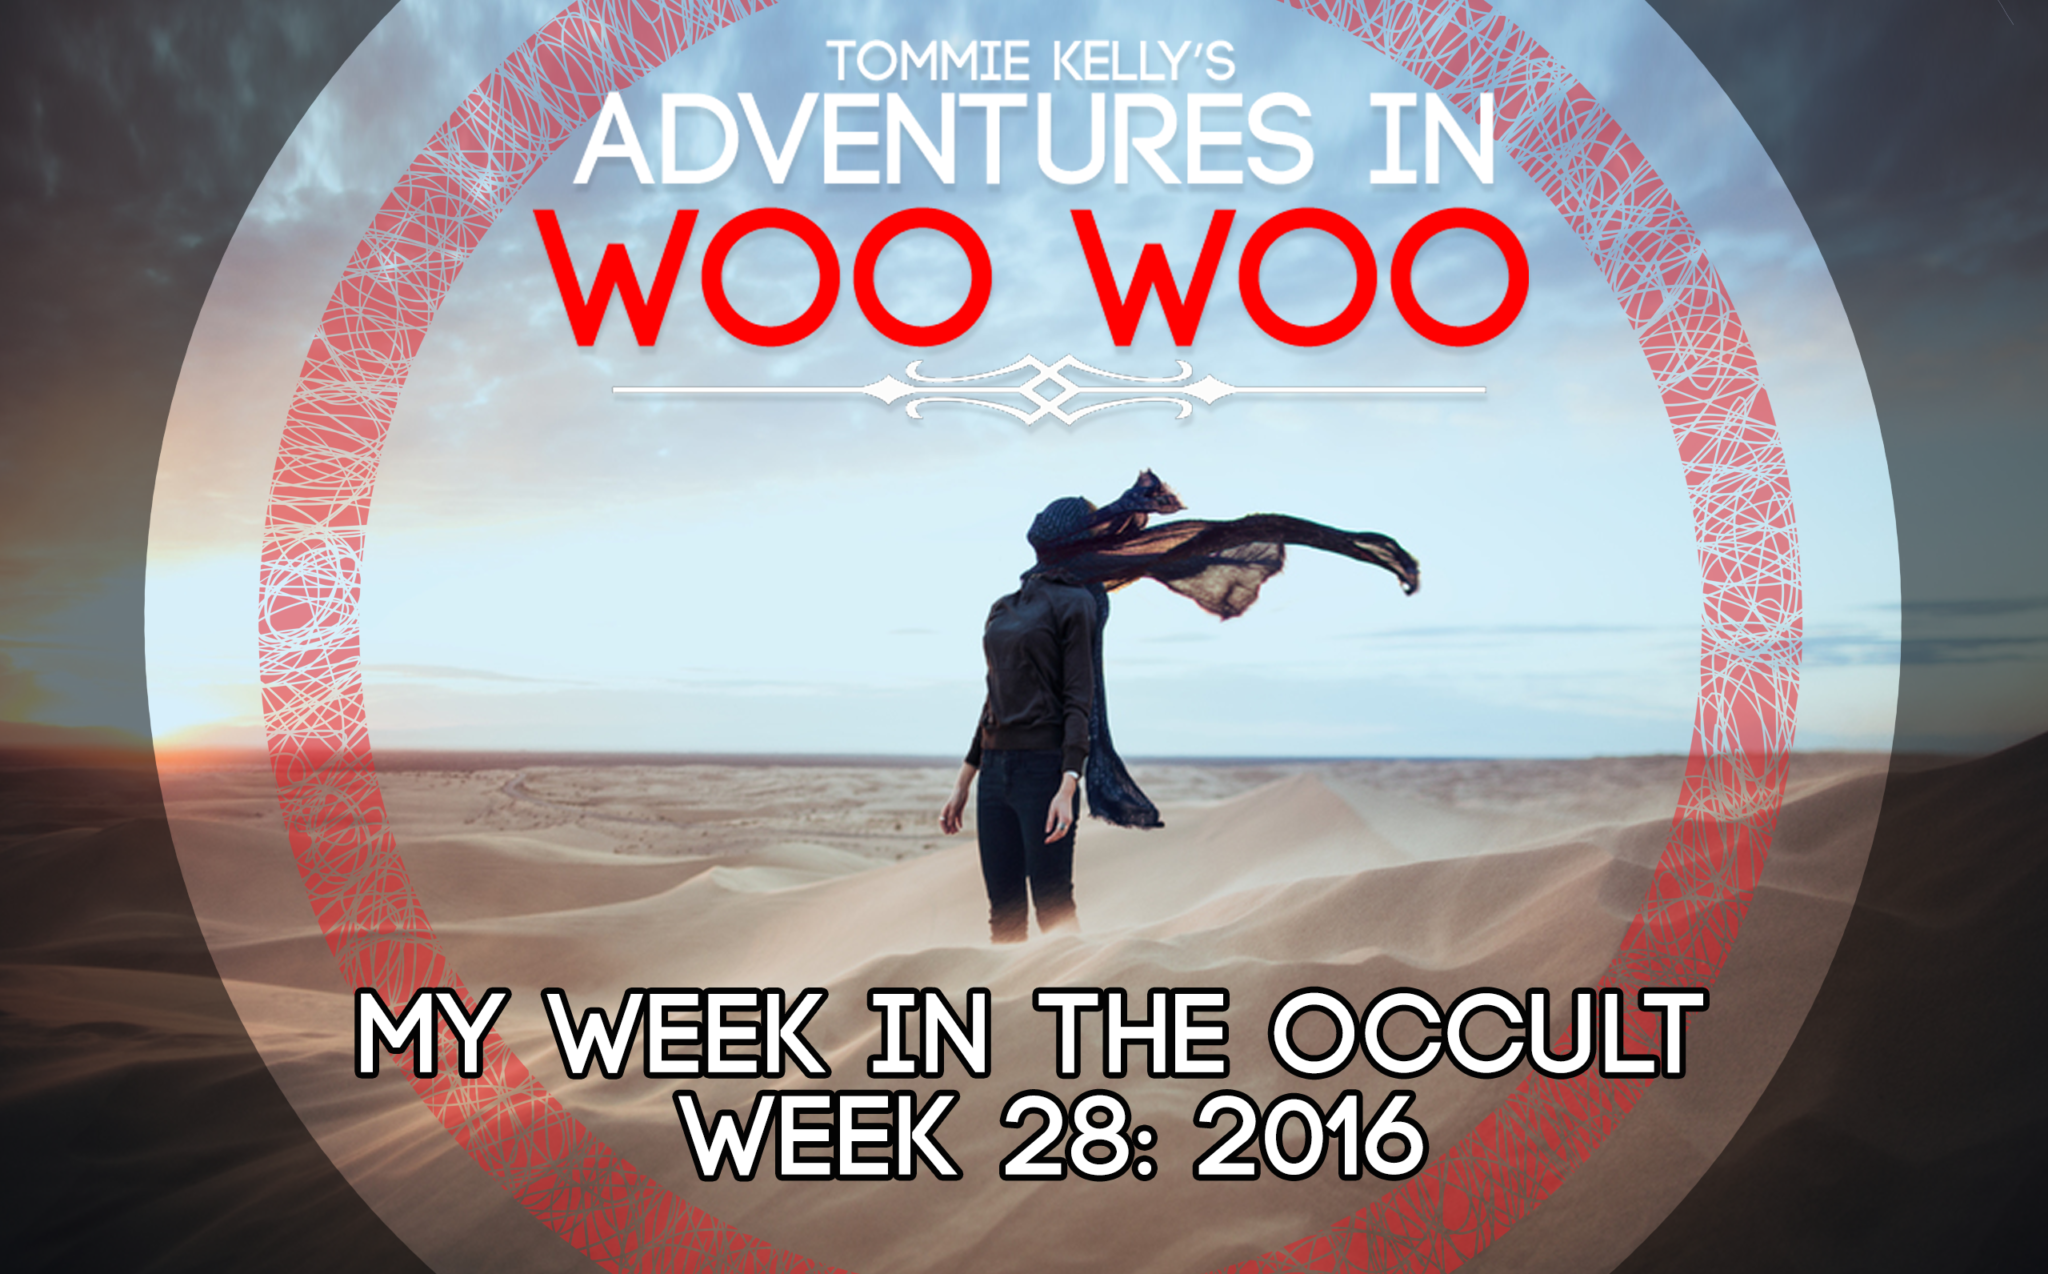 week in the occult